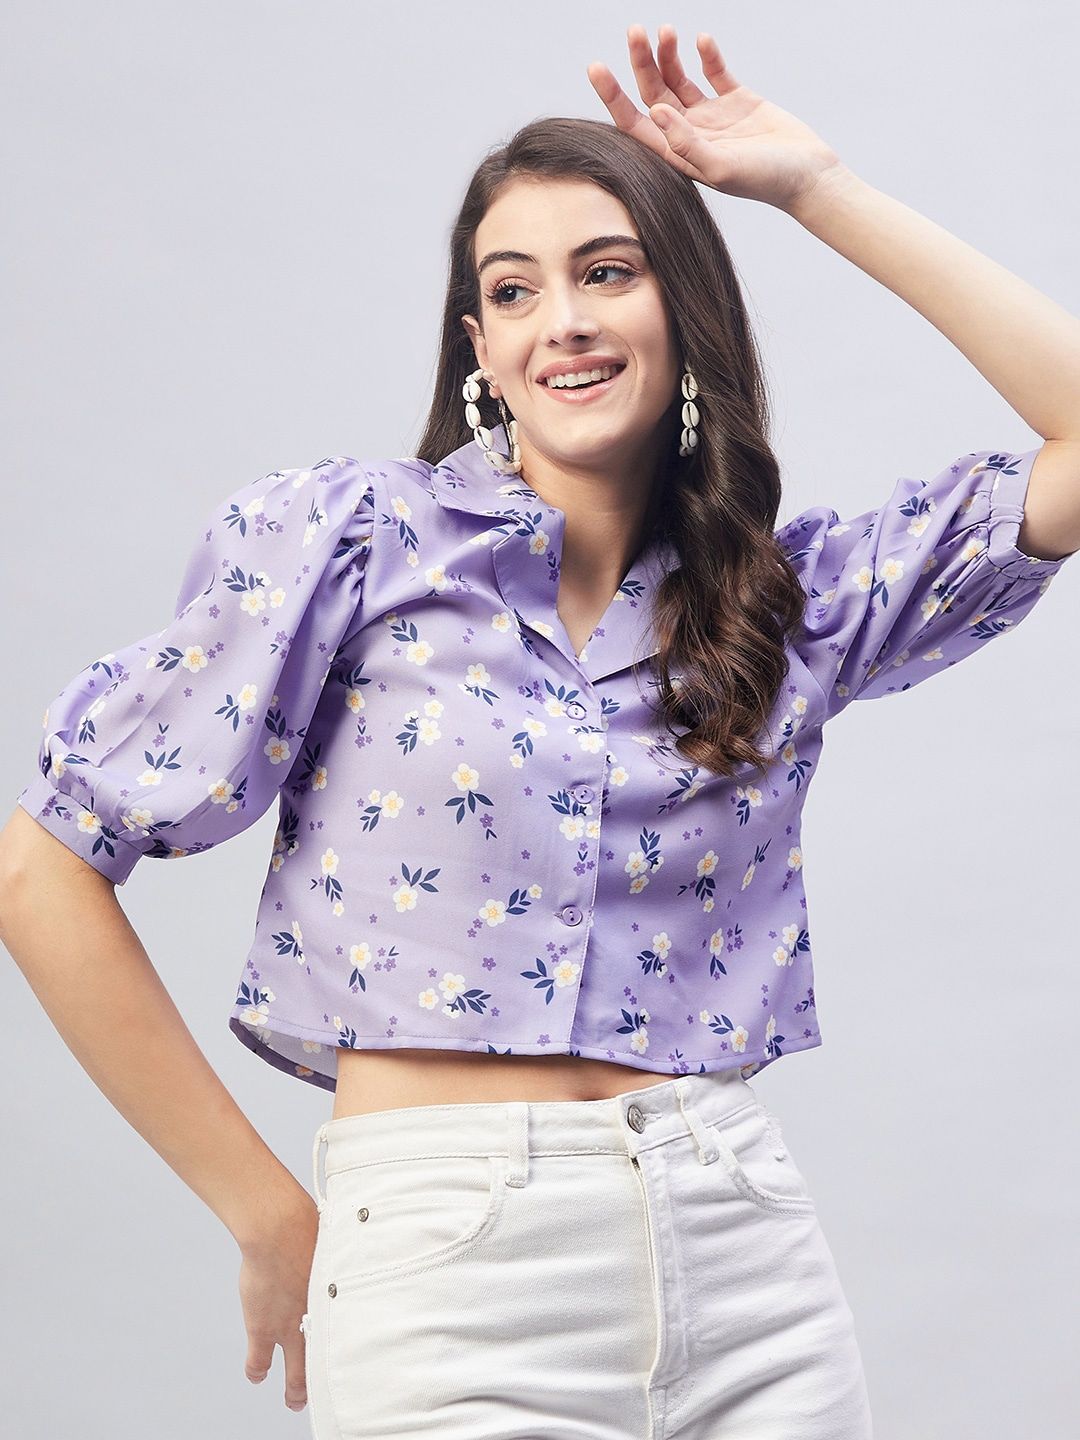 Marie Claire Floral Print Shirt Style Crop Top Price in India